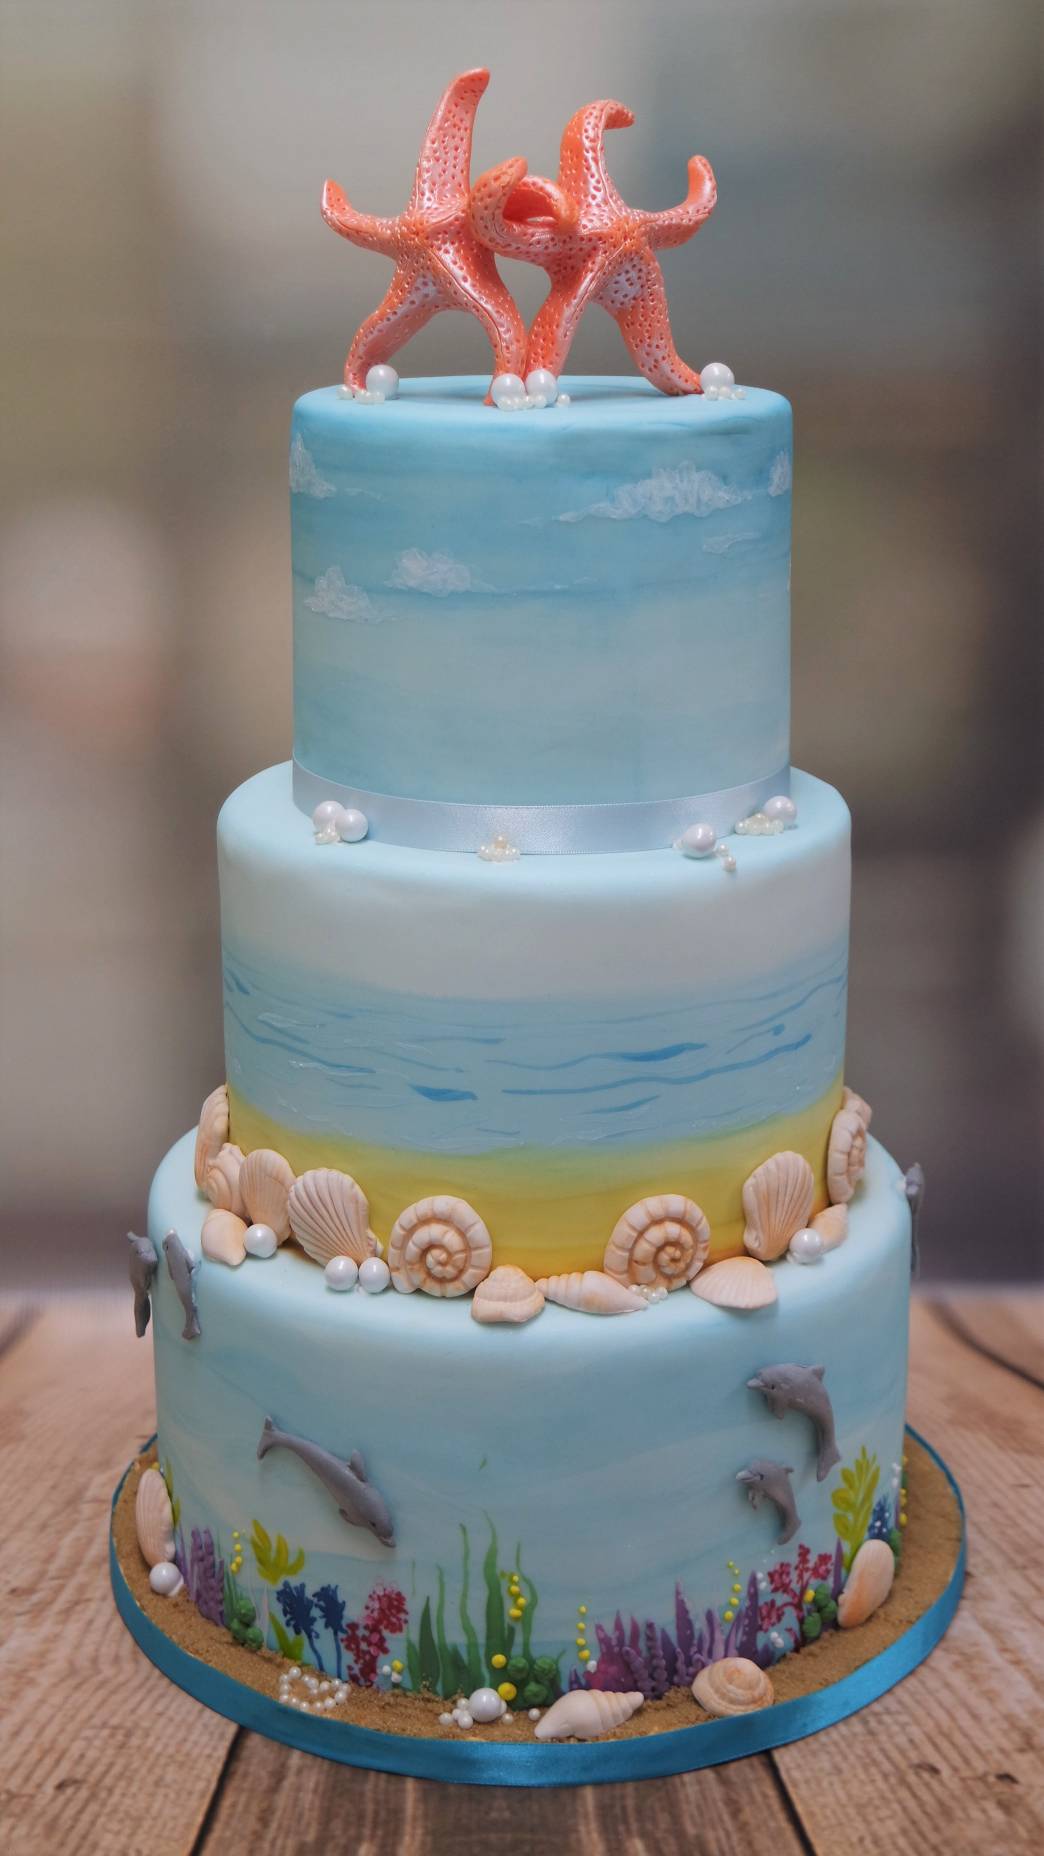 Crafty Cakes on X: The perfect cake for a beach themed wedding by